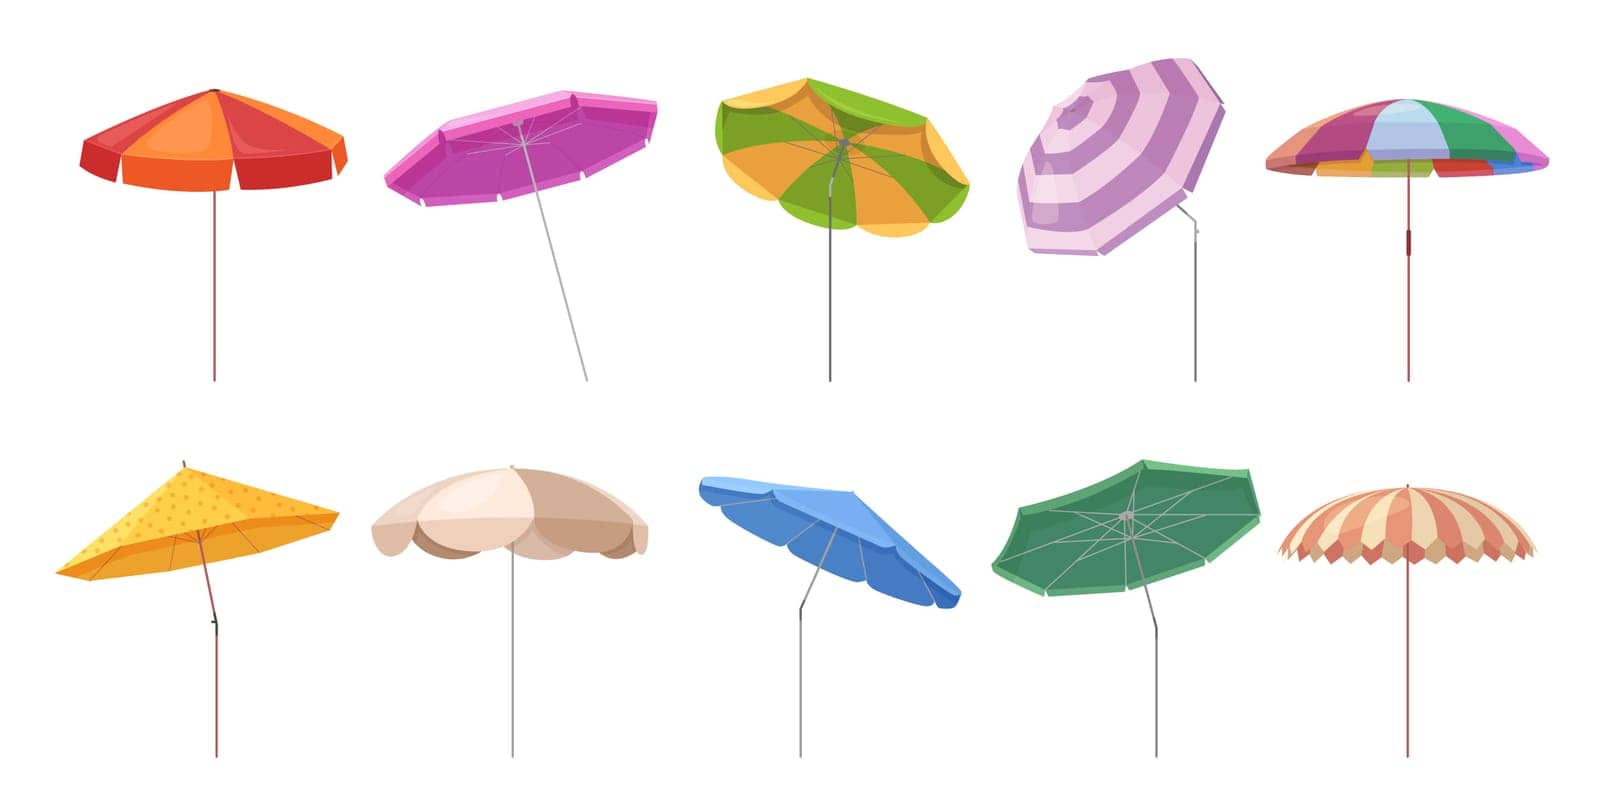 Beach umbrellas set vector illustration. Cartoon isolated collection of summer sunshade with different colors and patterns, side view of garden or swimming pool parasols for sea vacation relax